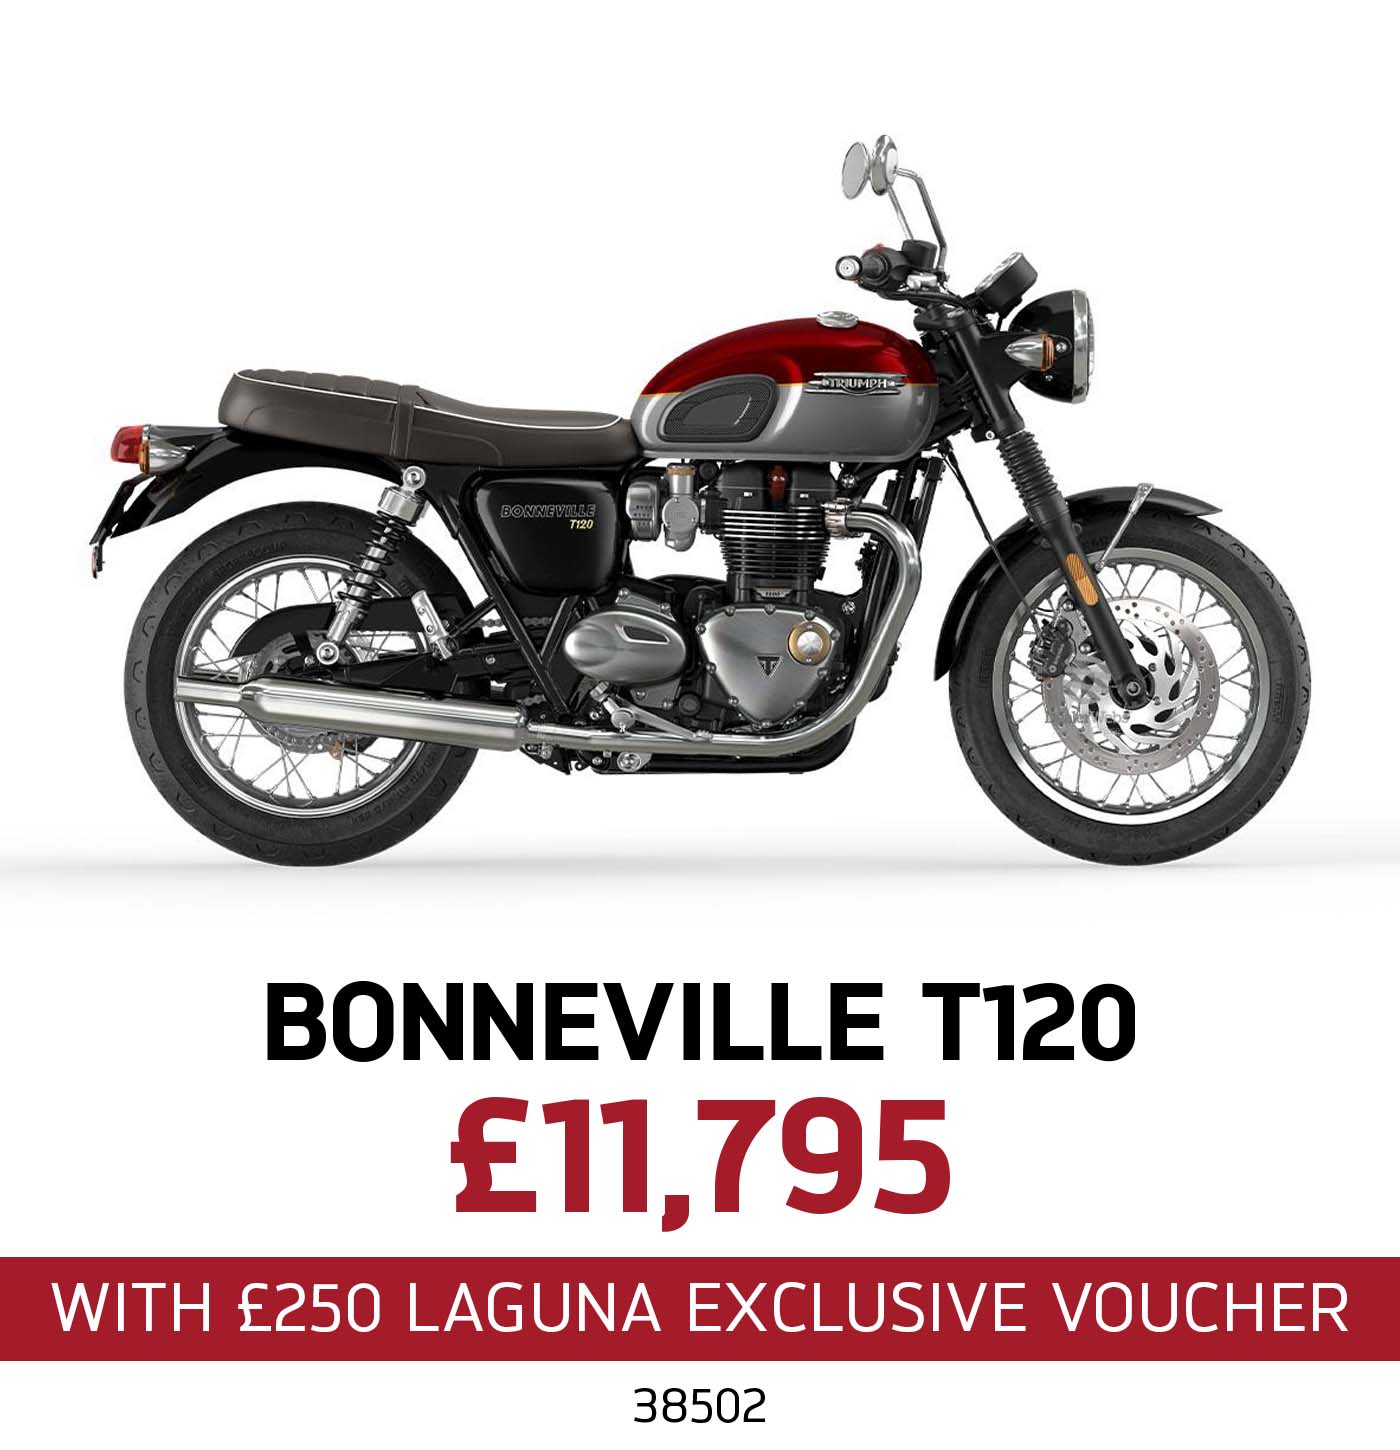 Enjoy £250 towards 1 of 3 fantastic options with your new Triumph motorcycle, only at Laguna Triumph in Ashford and Maidstone.